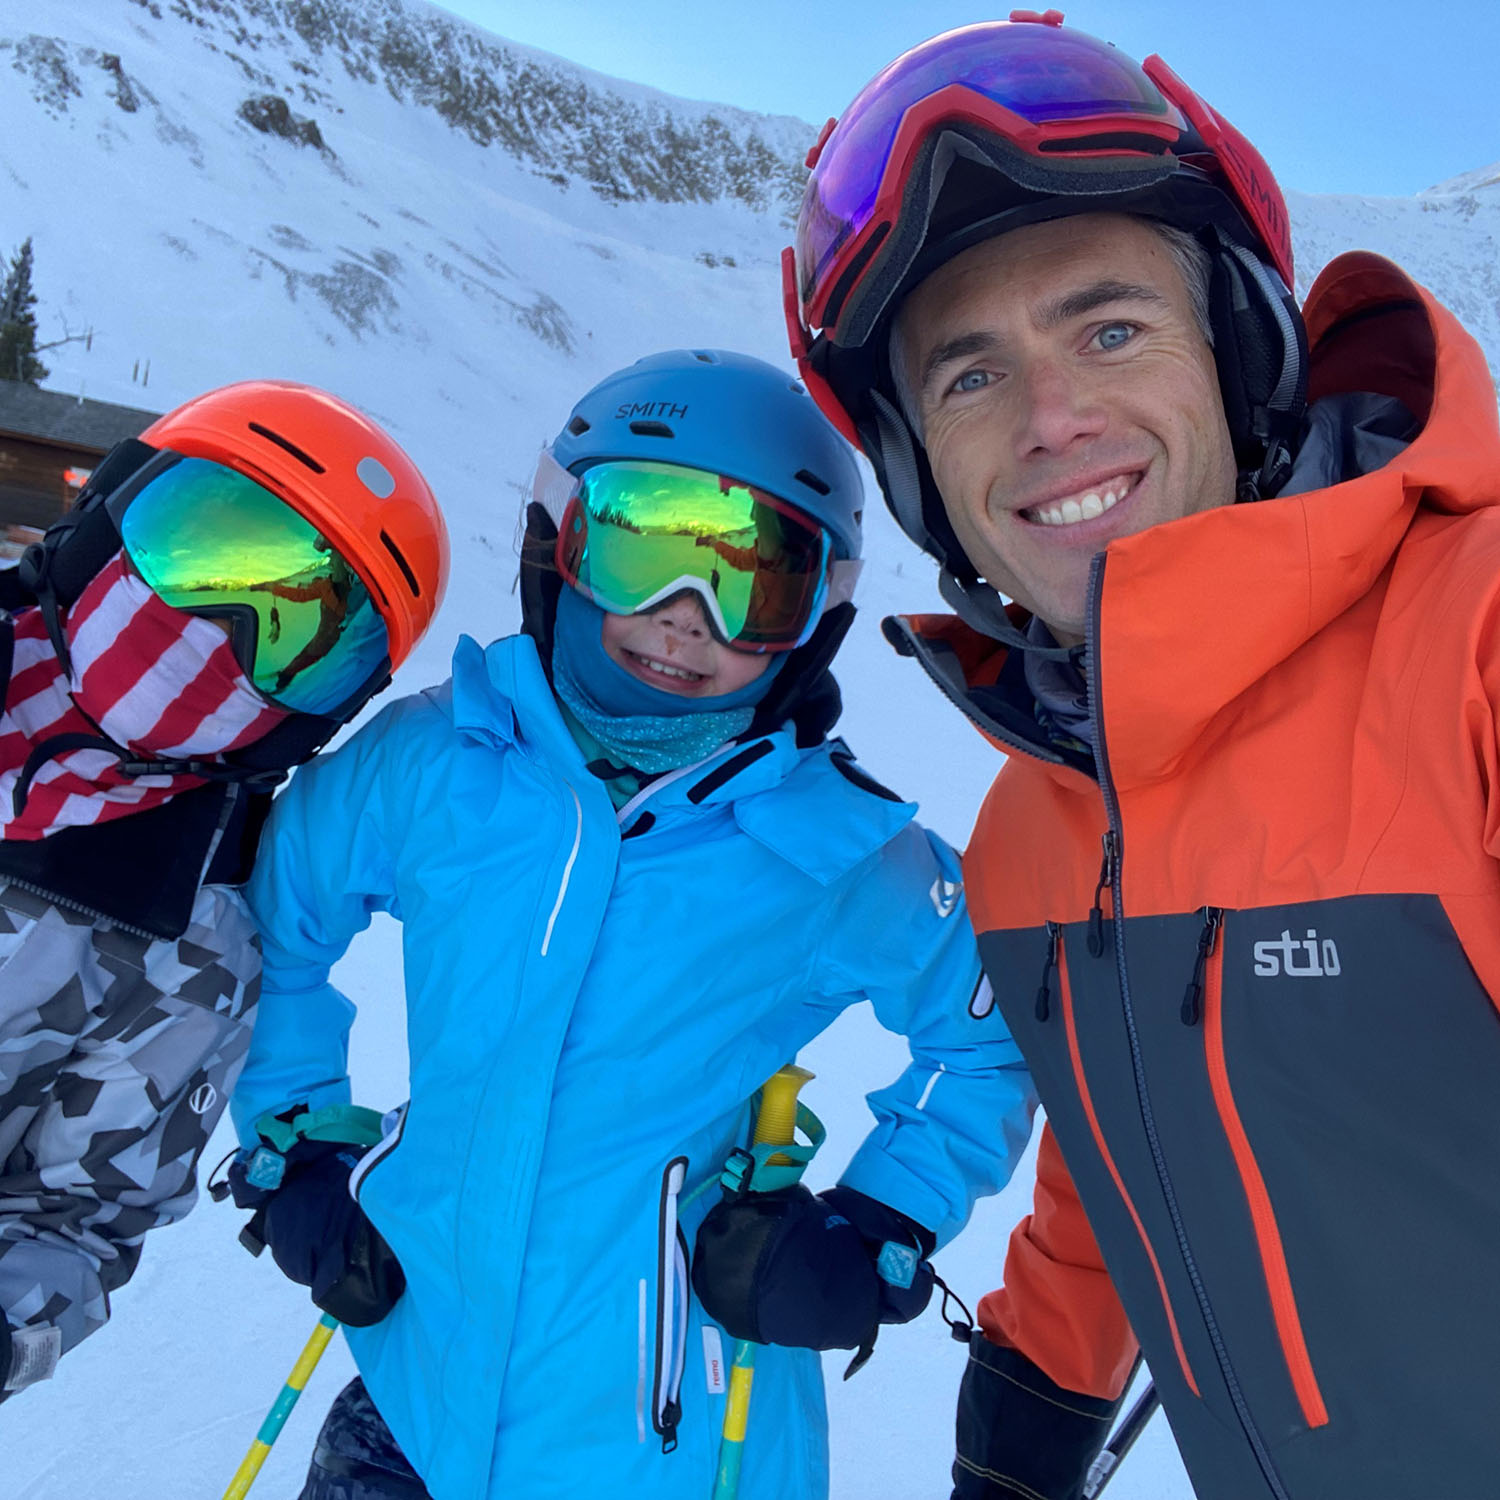 Director Matt Kid and two children smile at the camera while skiing